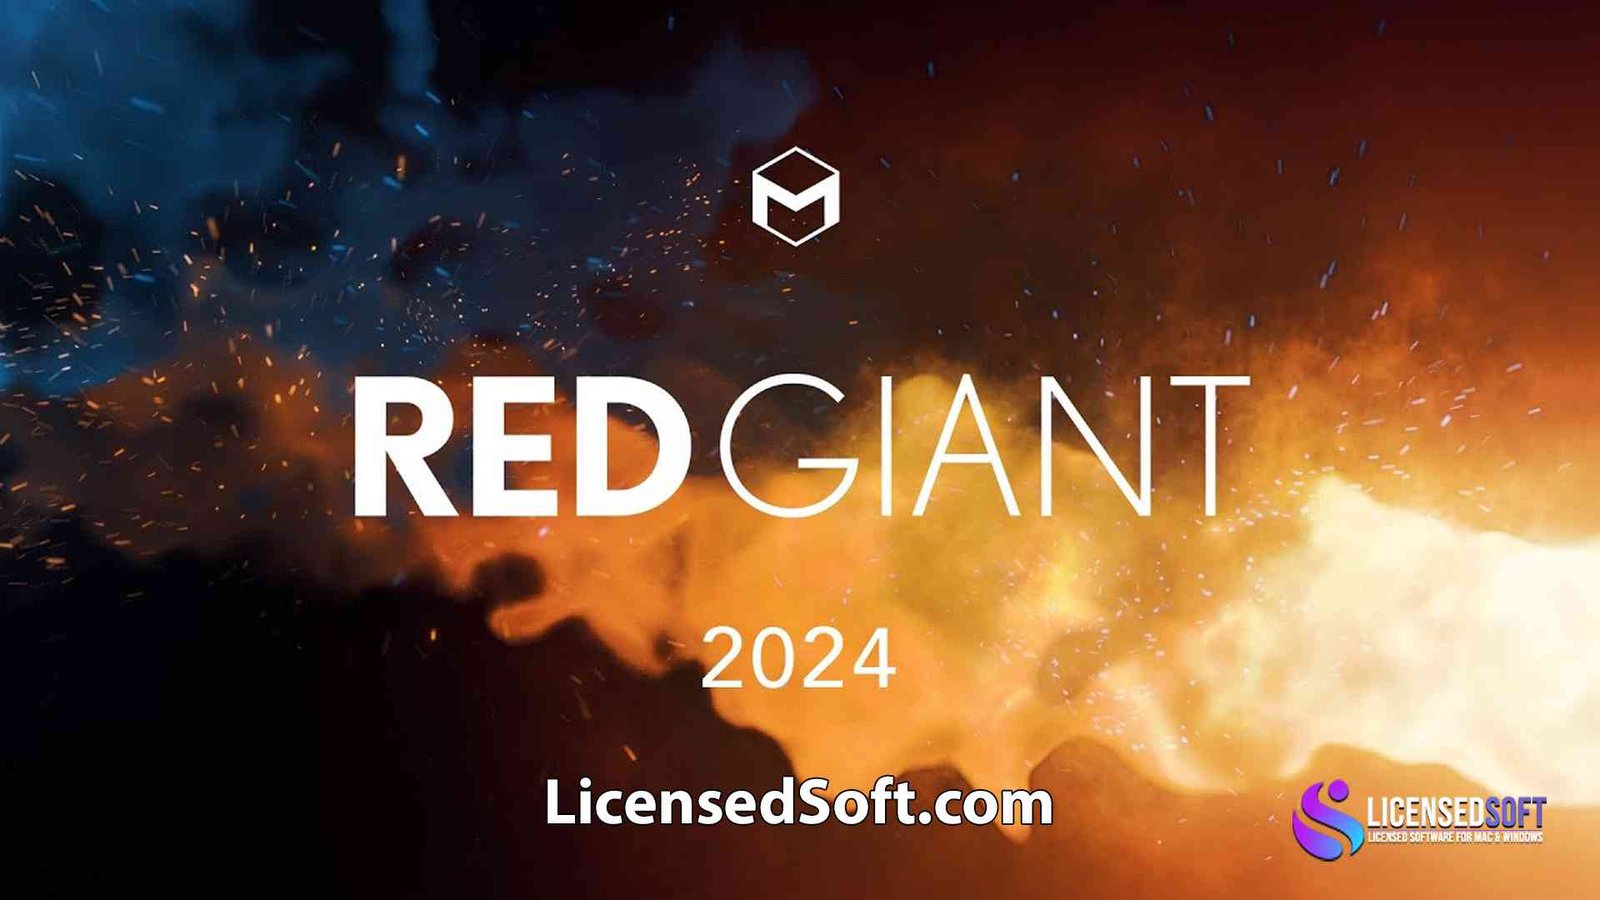 Red Giant Universe 2024 Full Version Cover Image By LicensedSoft